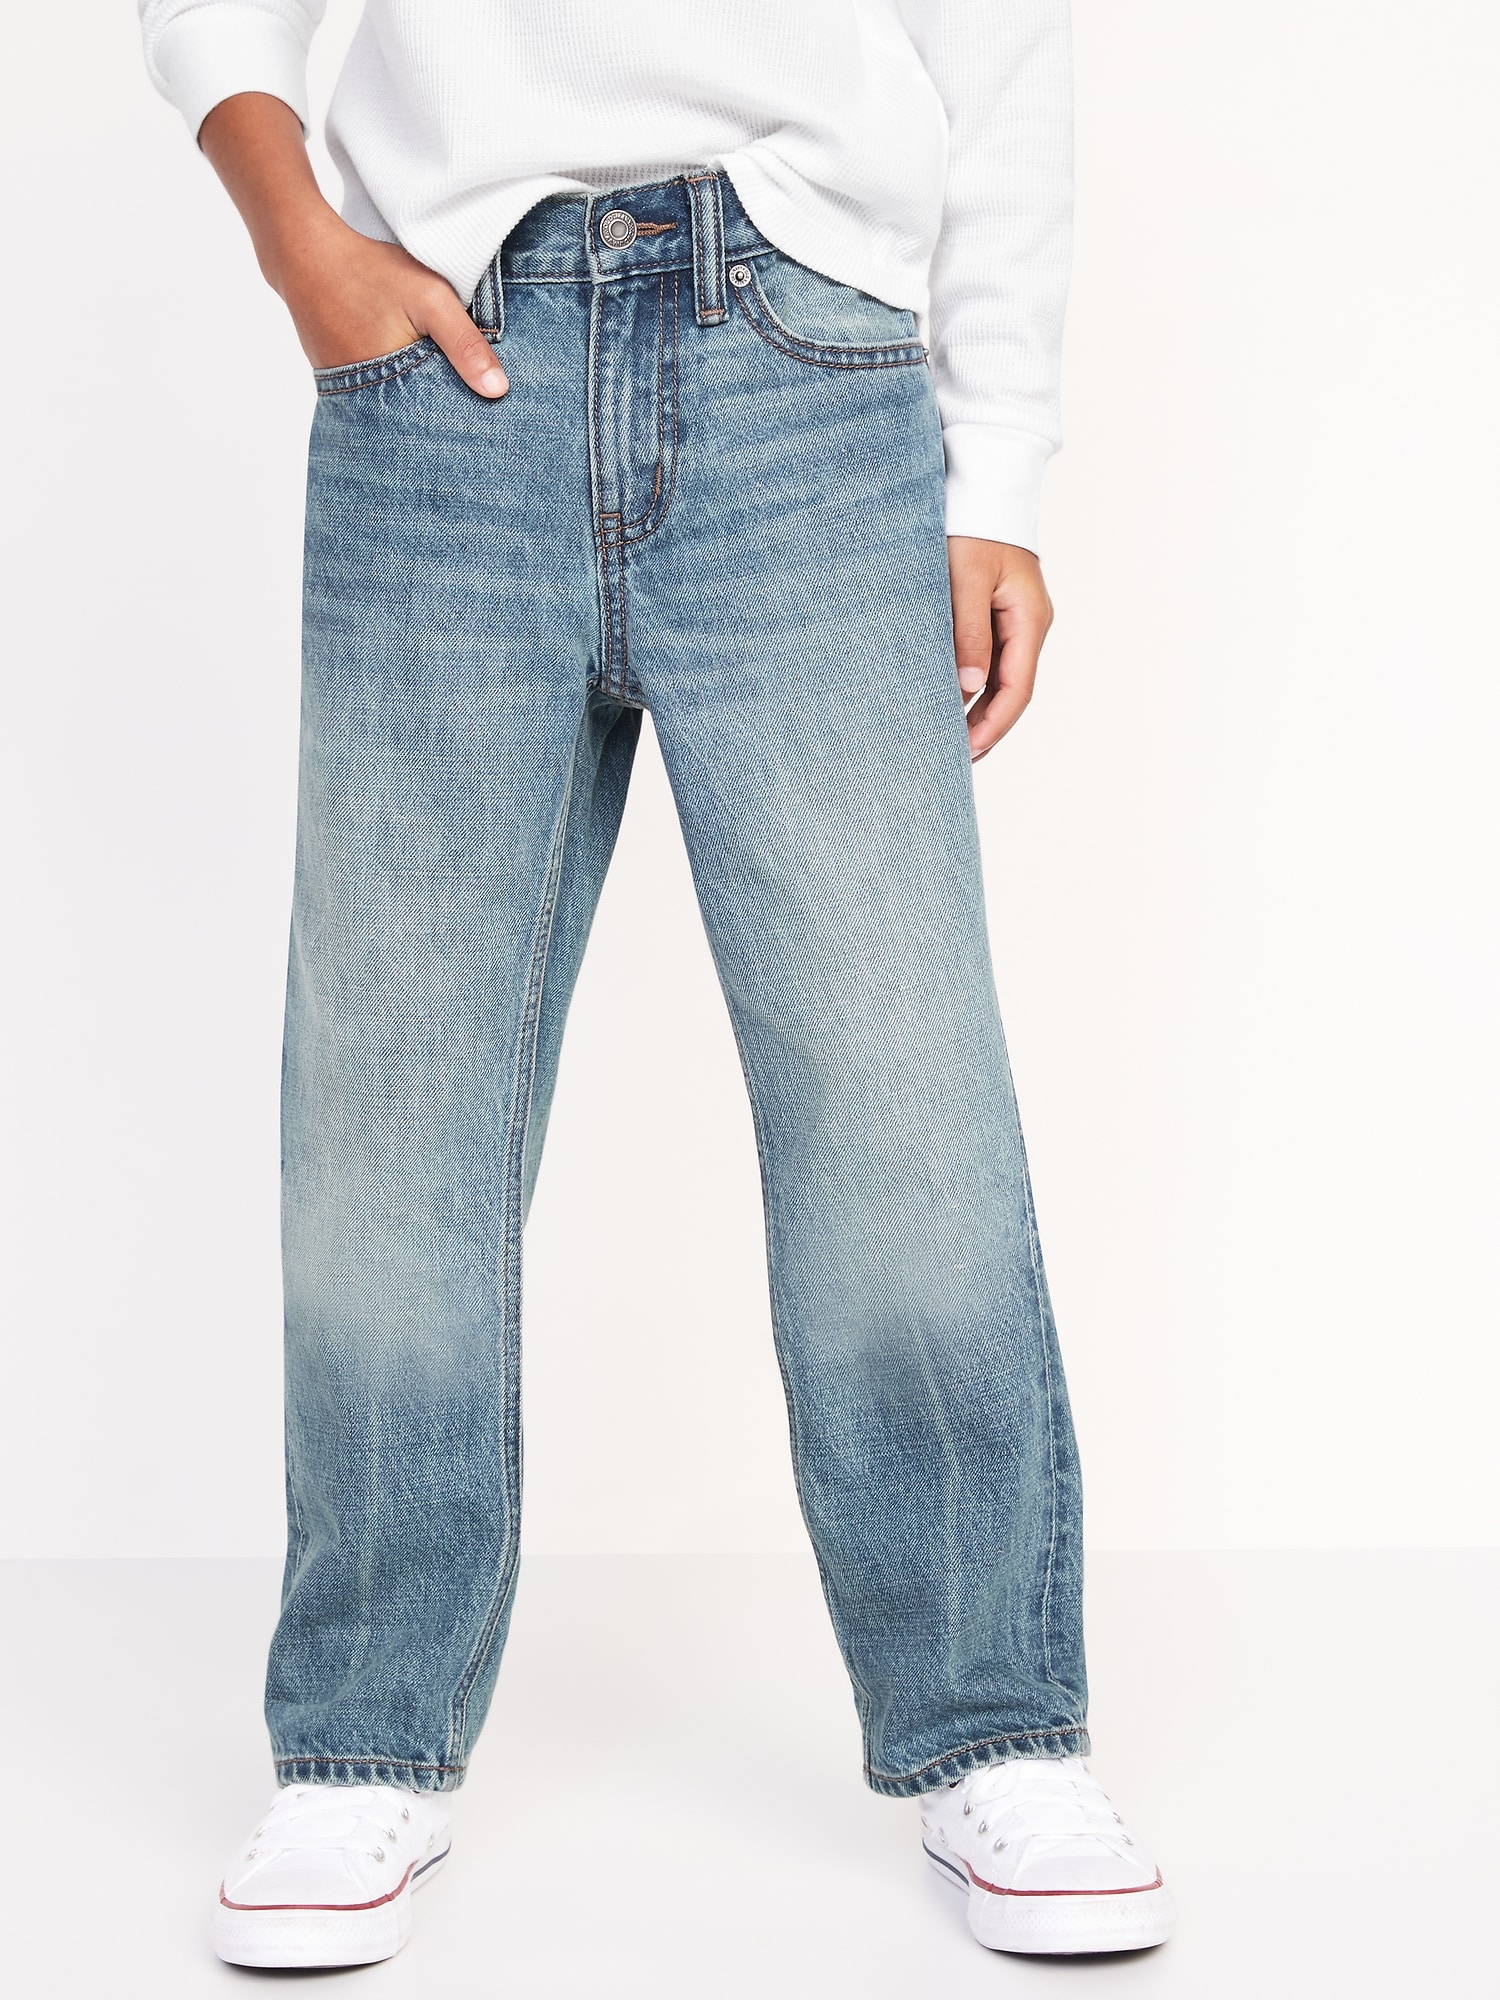 Original Loose Non-Stretch Jeans for Boys | Old Navy